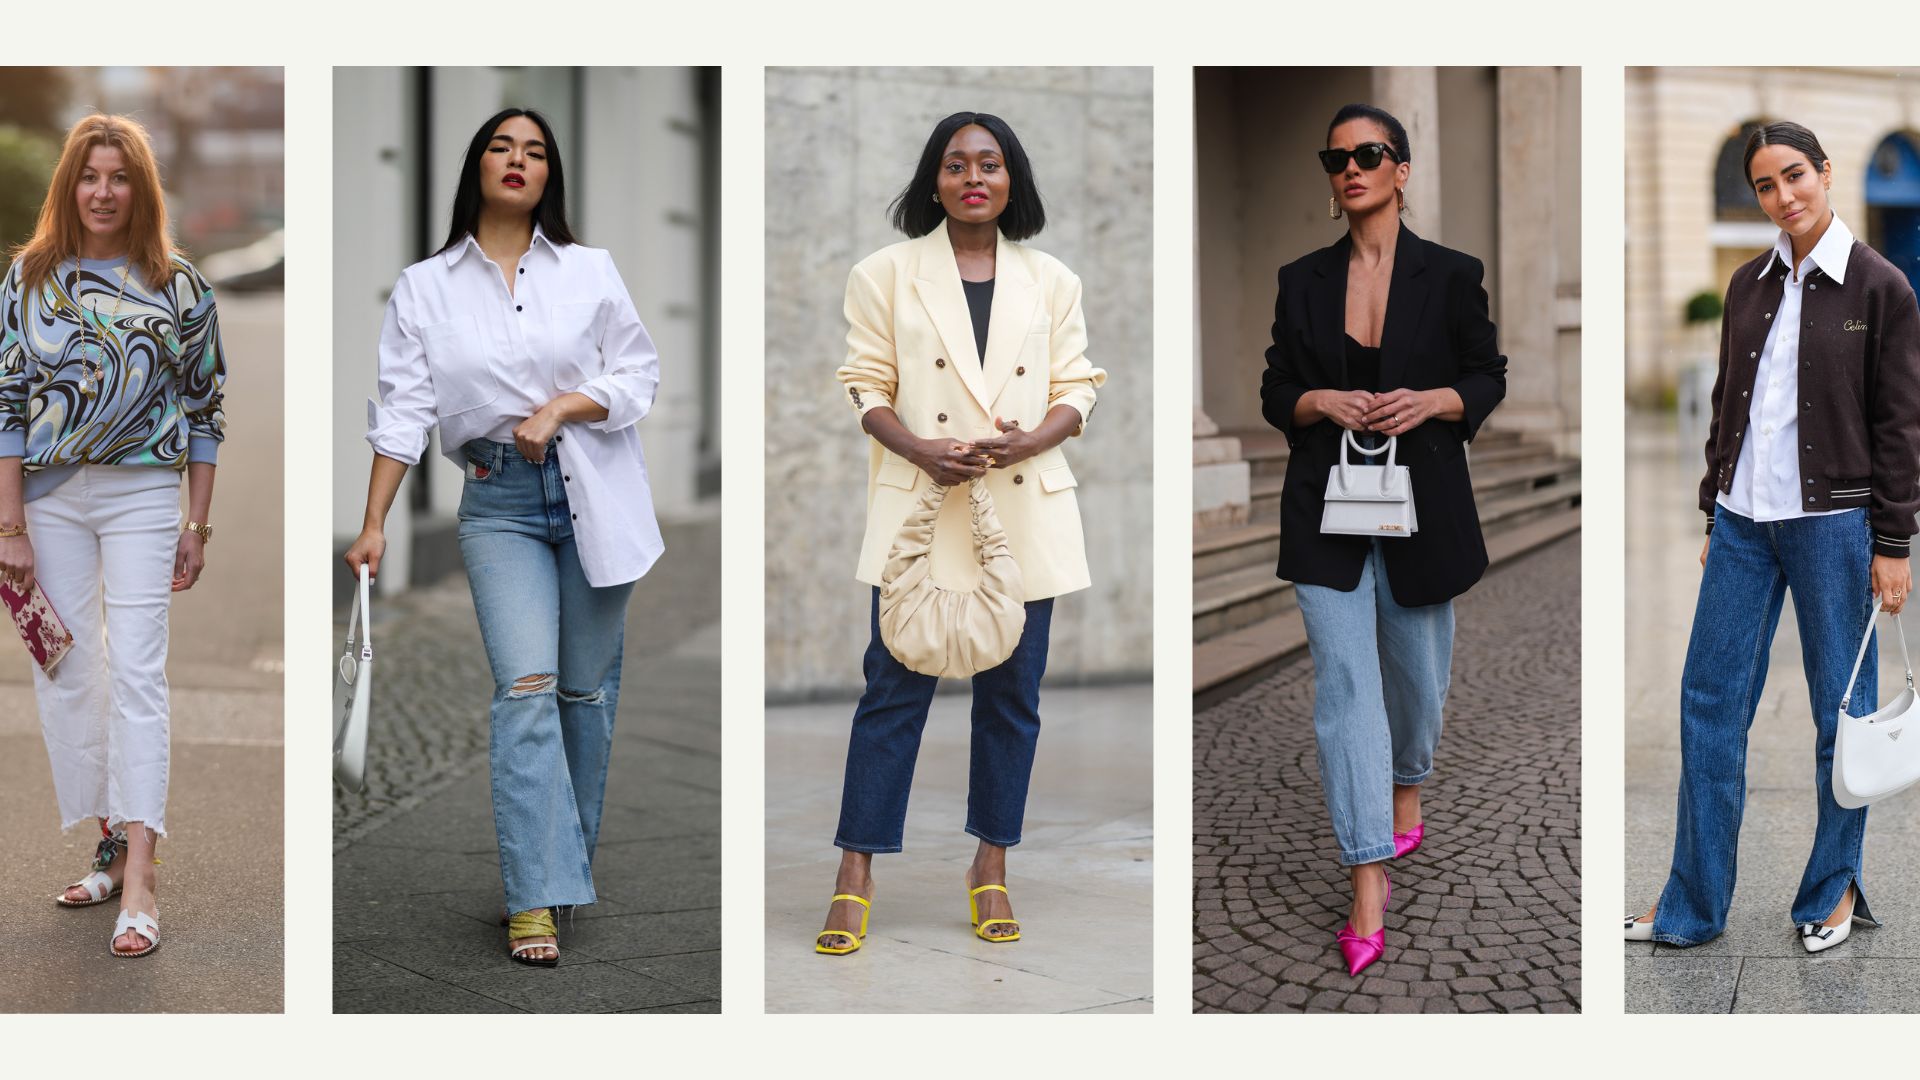 How to Find the Best Jeans for Your Body Type